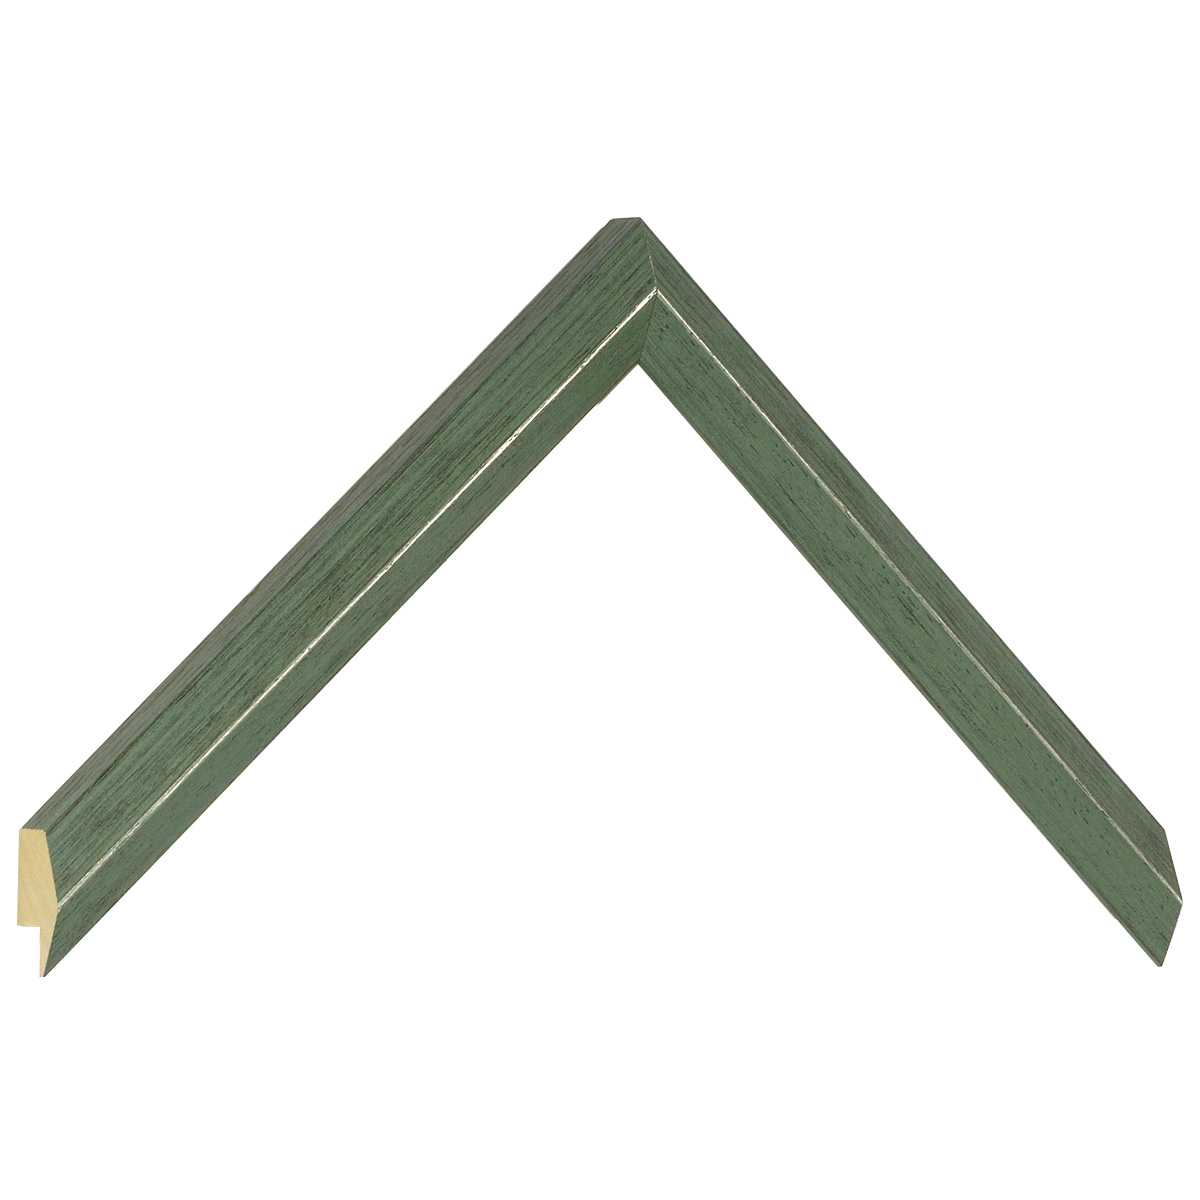 Moulding ayous - height 21mm - widht 18mm - Green - Sample